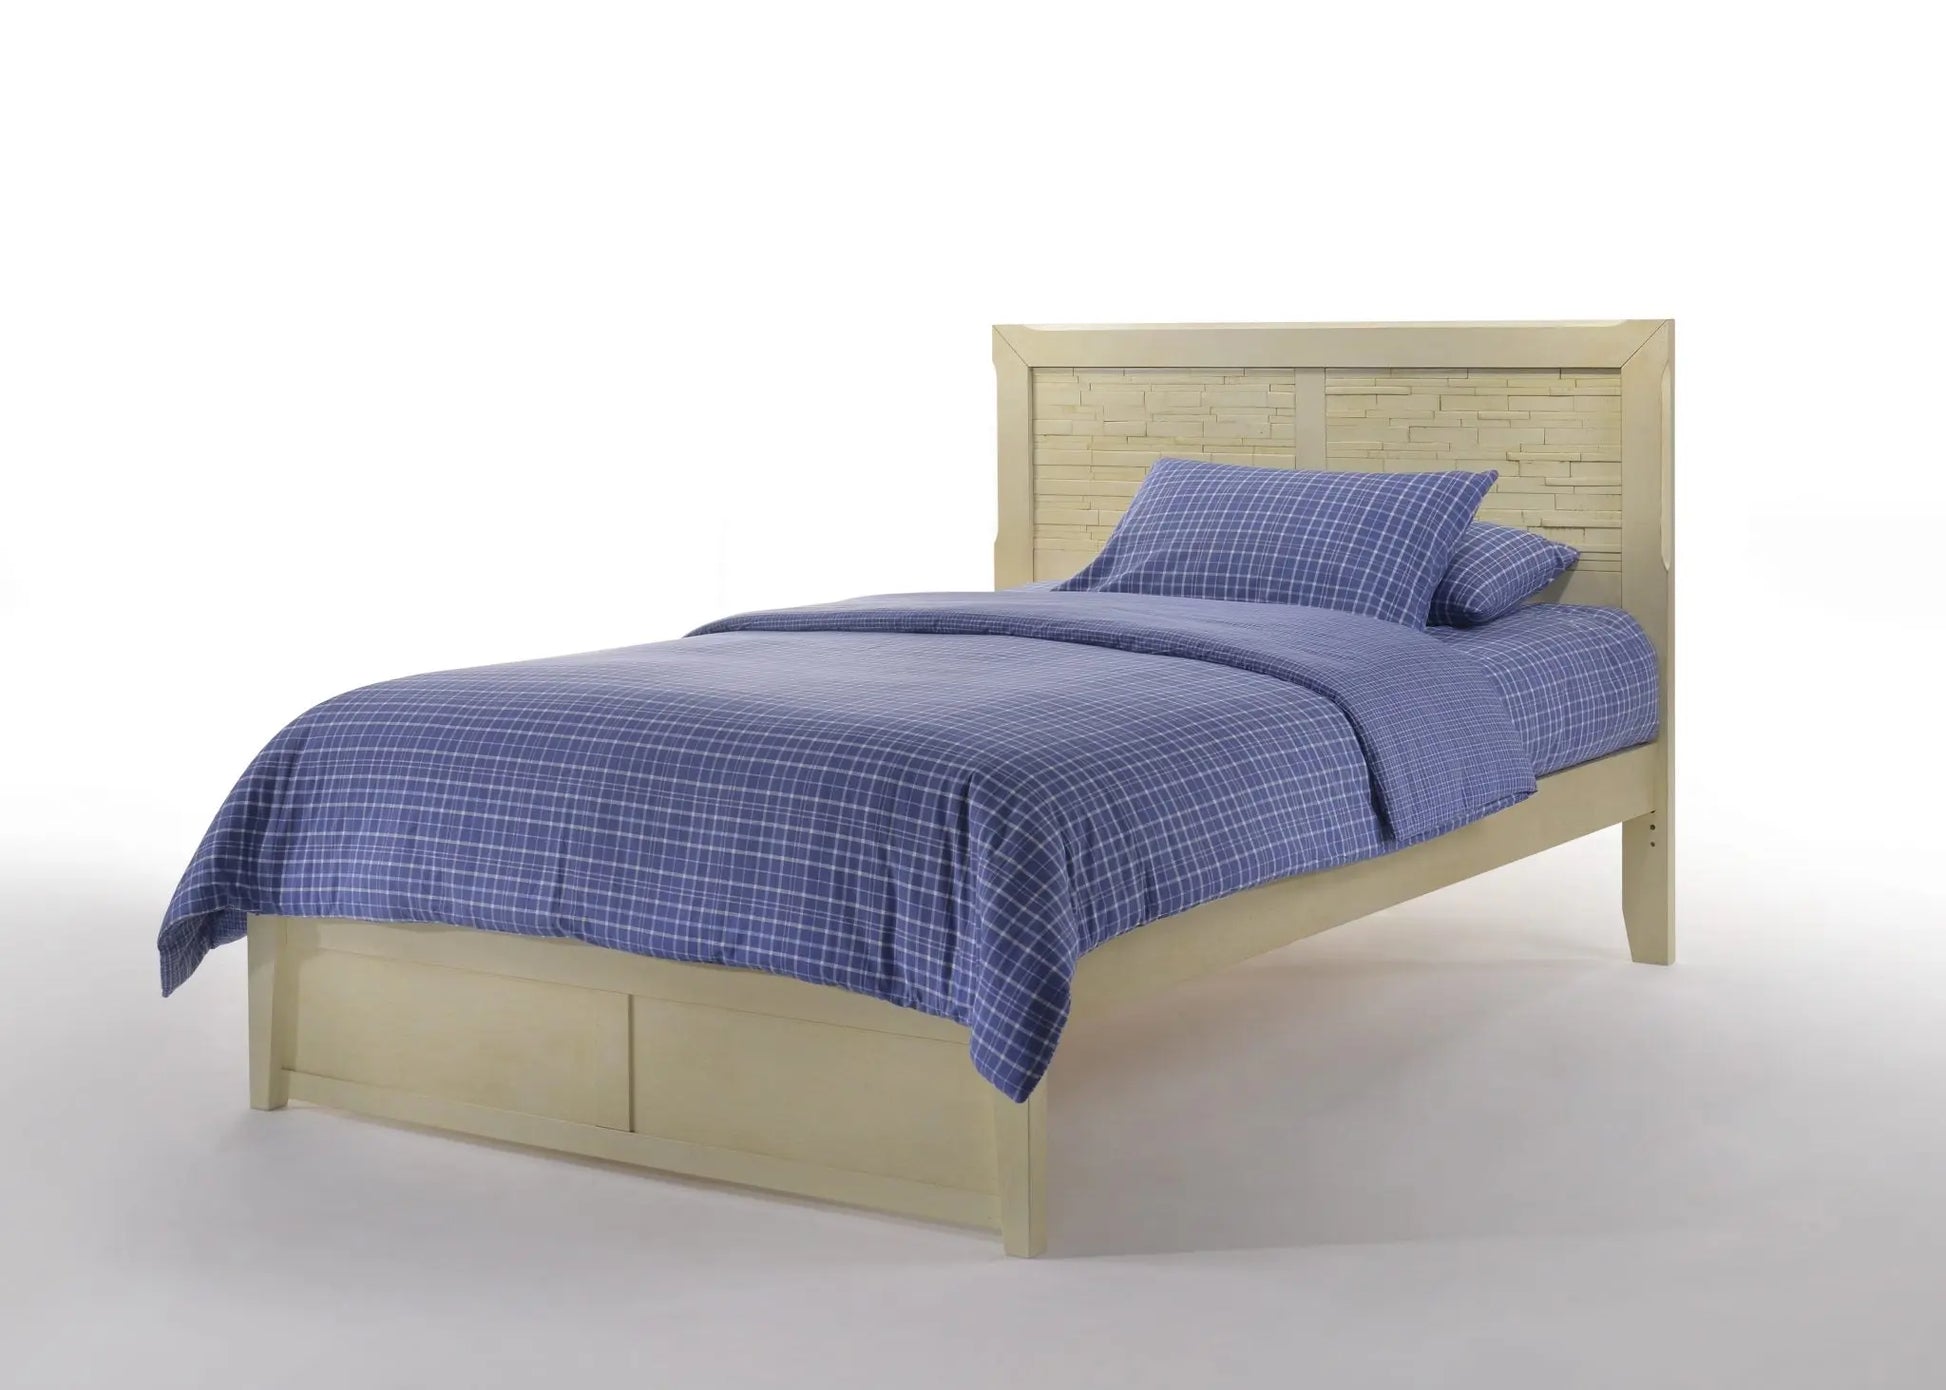 CAPE COD SAND DOLLAR BED night and day furniture